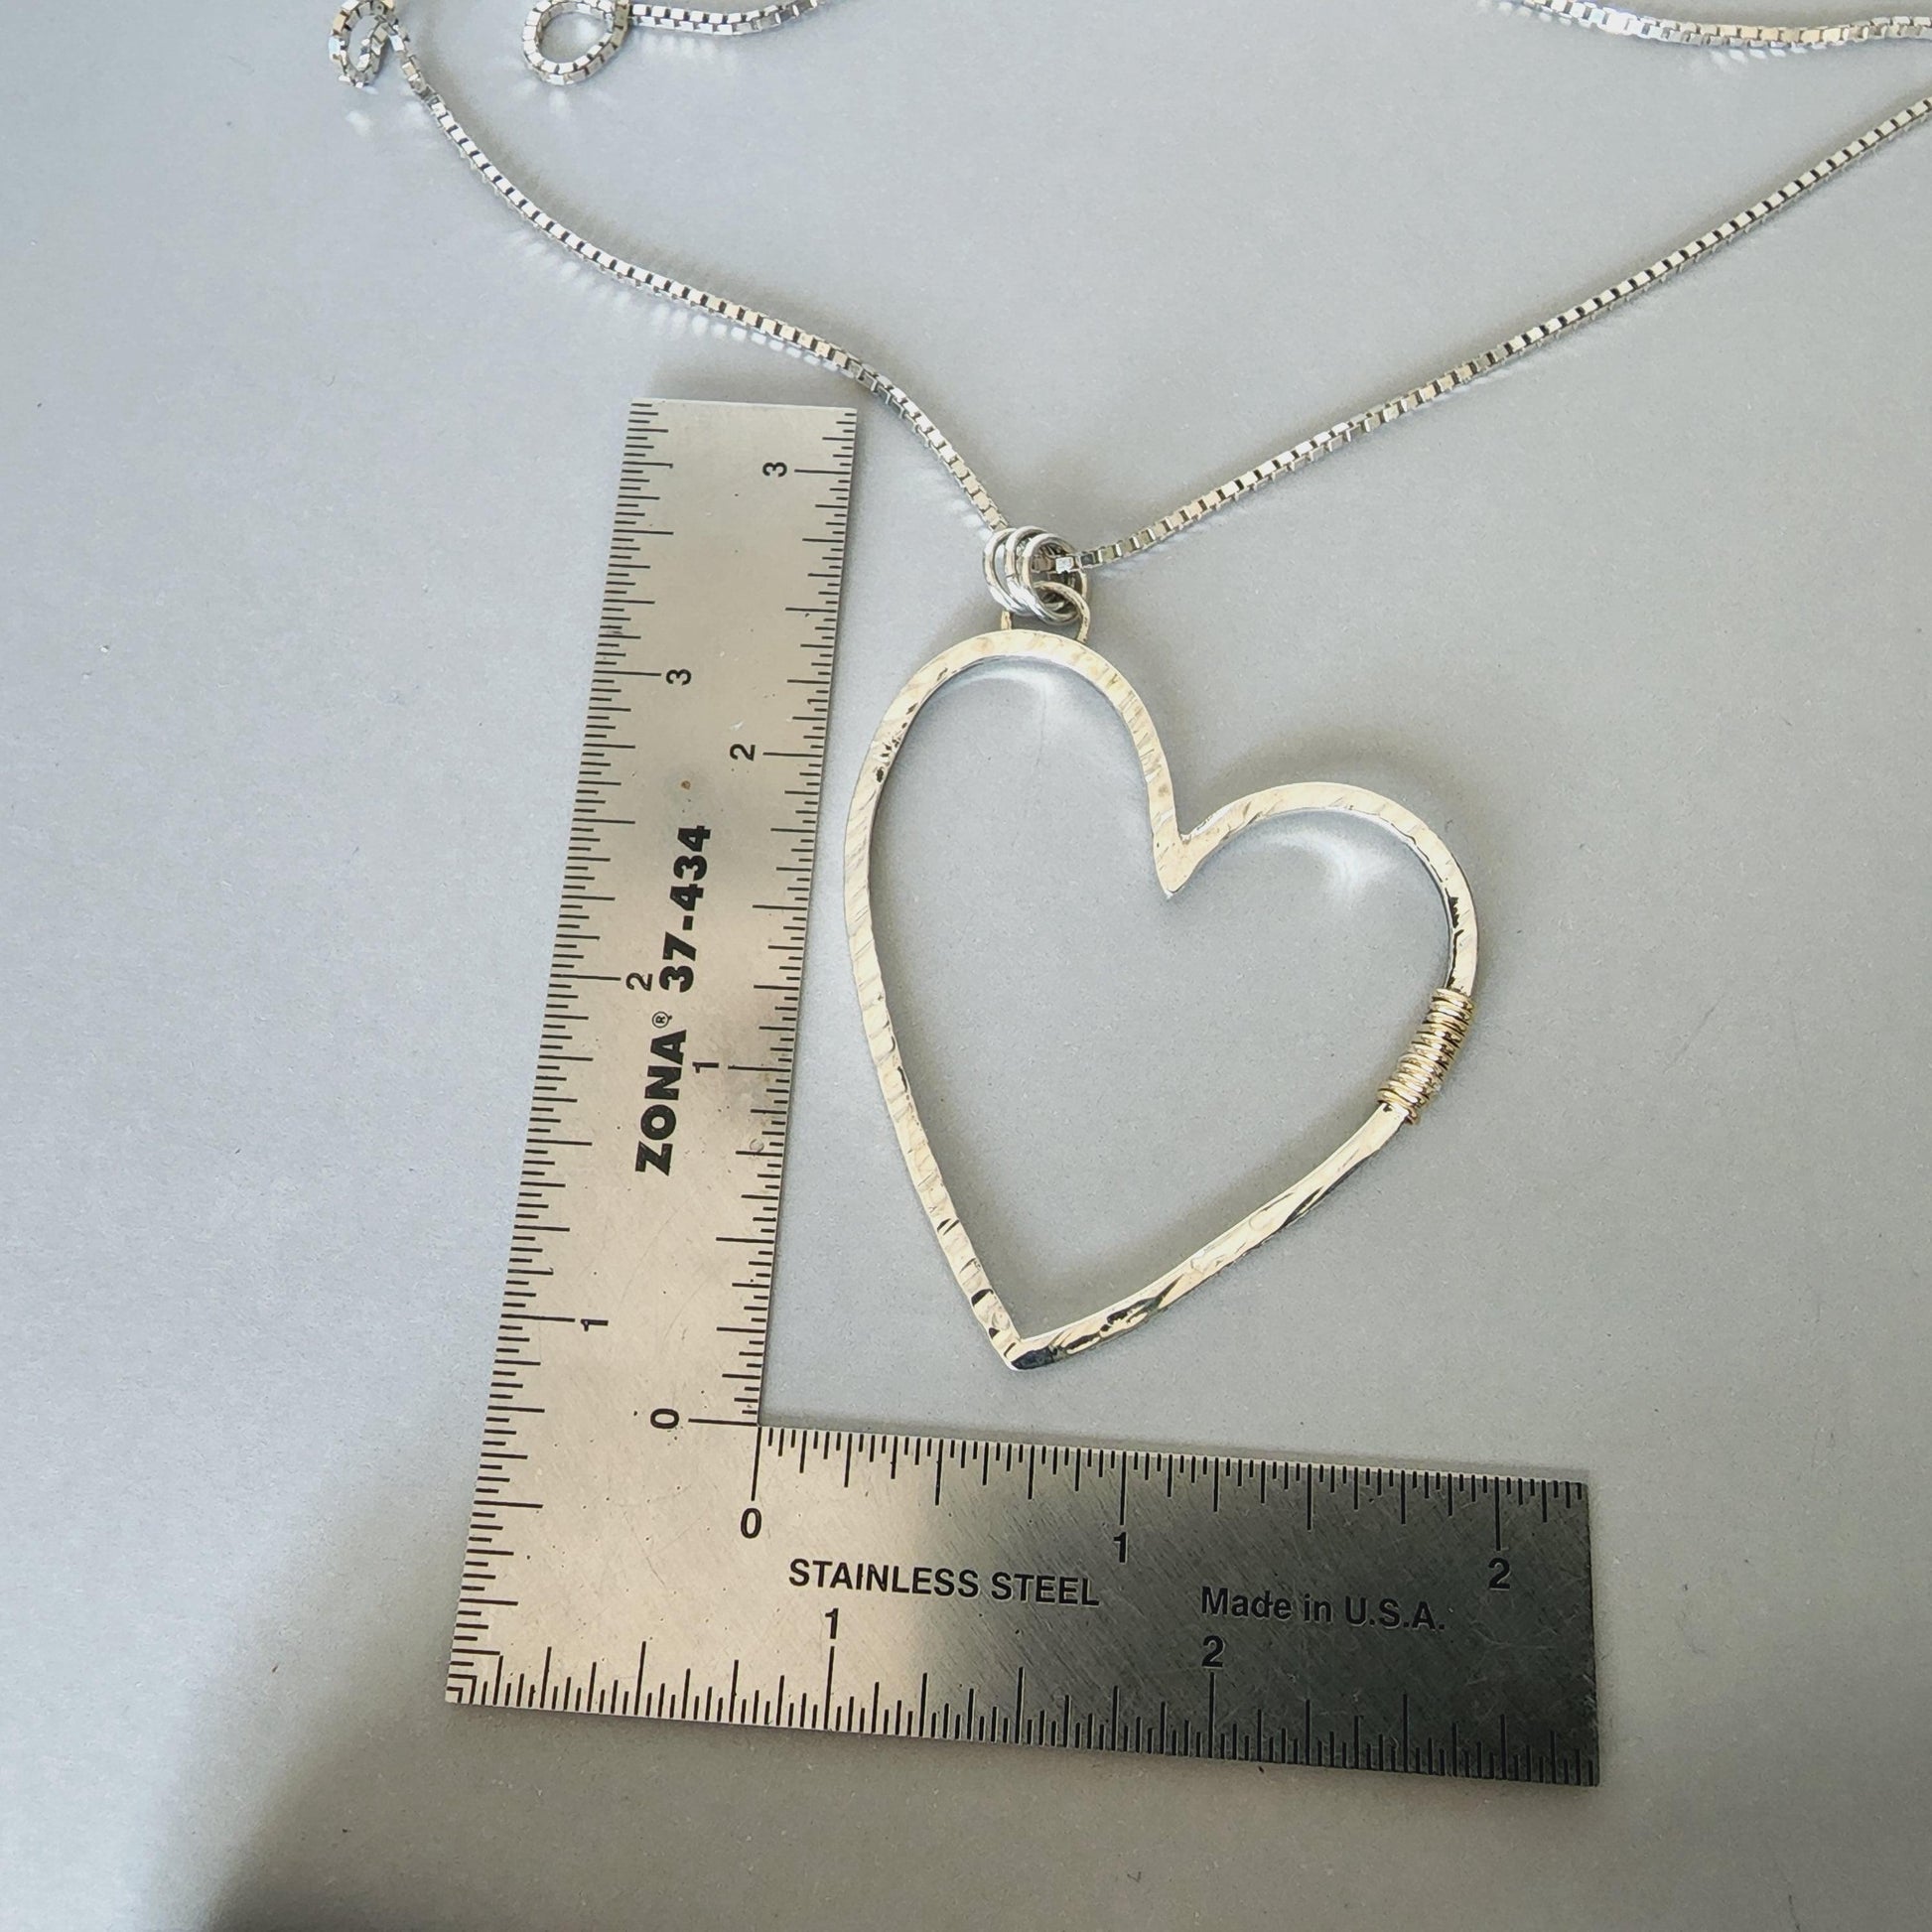 Handmade Sterling Silver Hammered Large Crazy Heart Necklace with Gold Filled Trim - Gilded Heart Designs